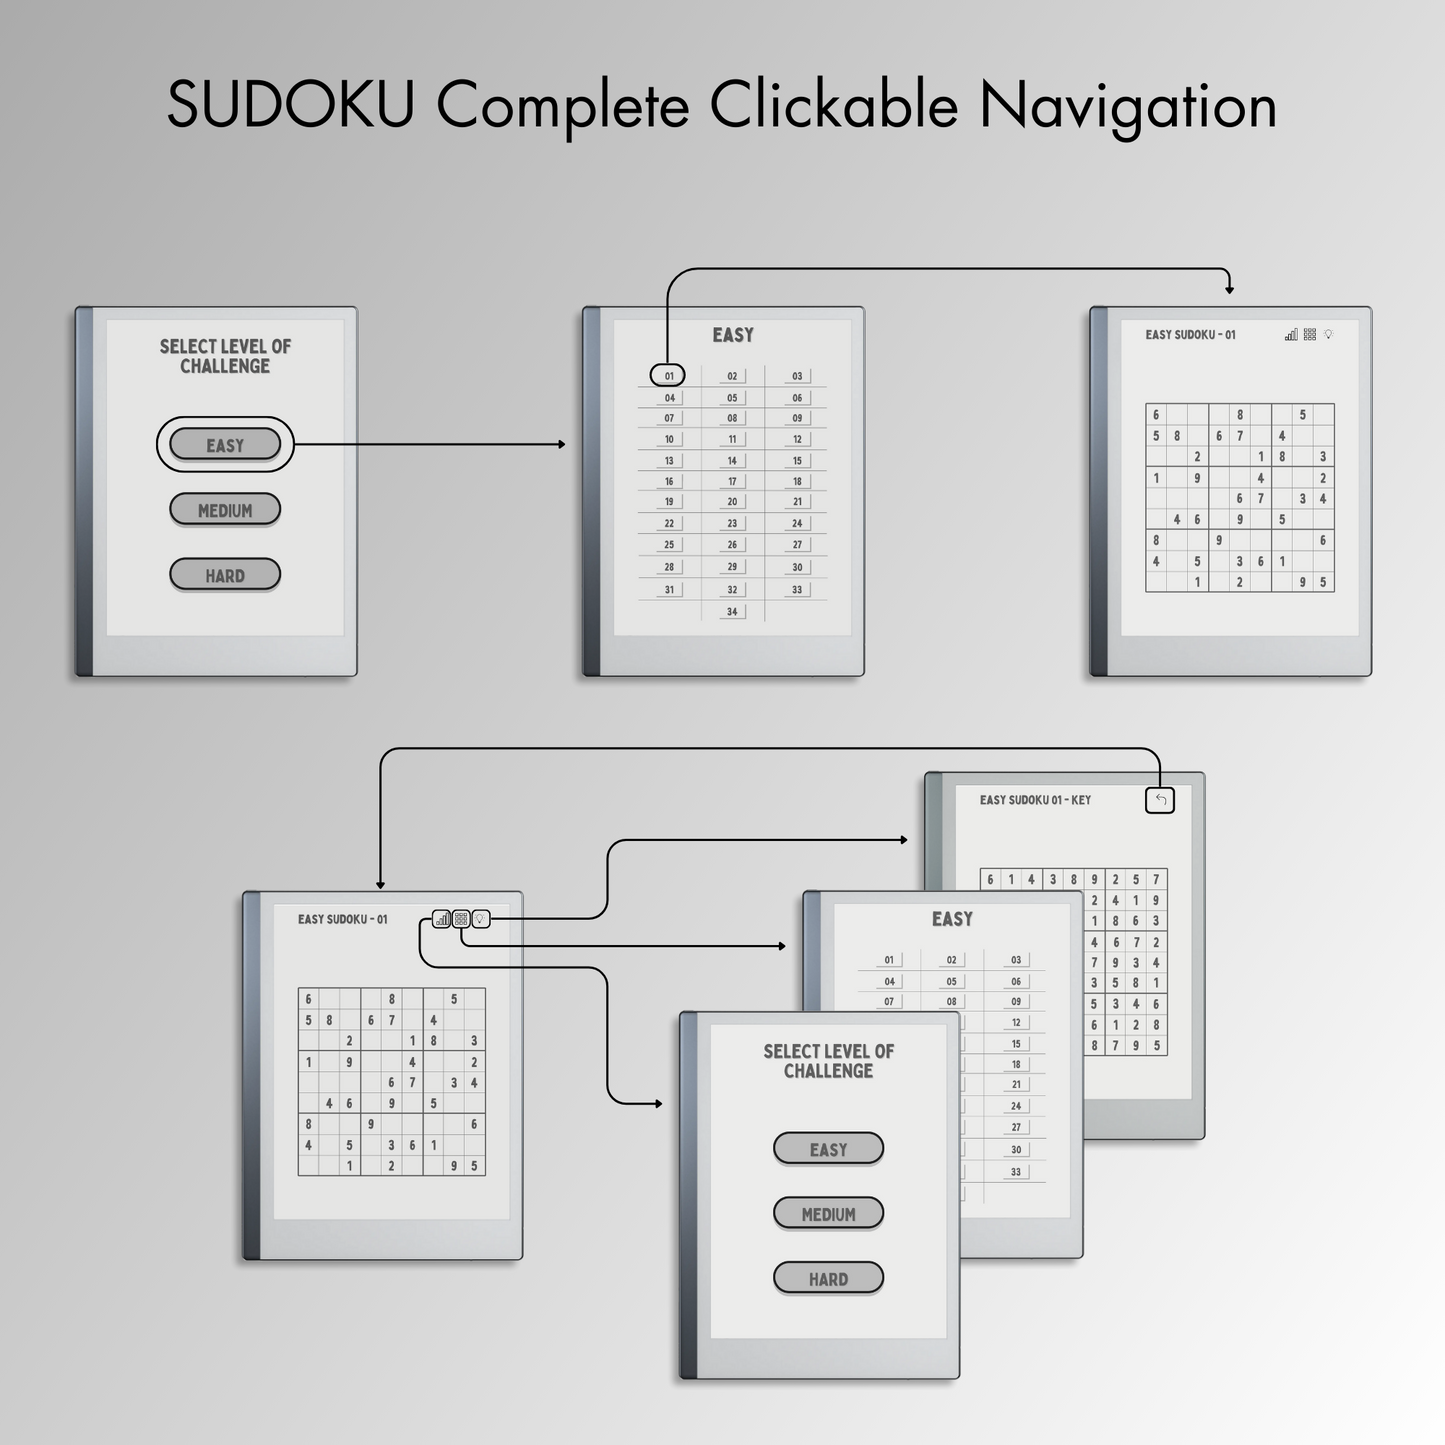 Remarkable 2 Sudoku Puzzles with full reference links.